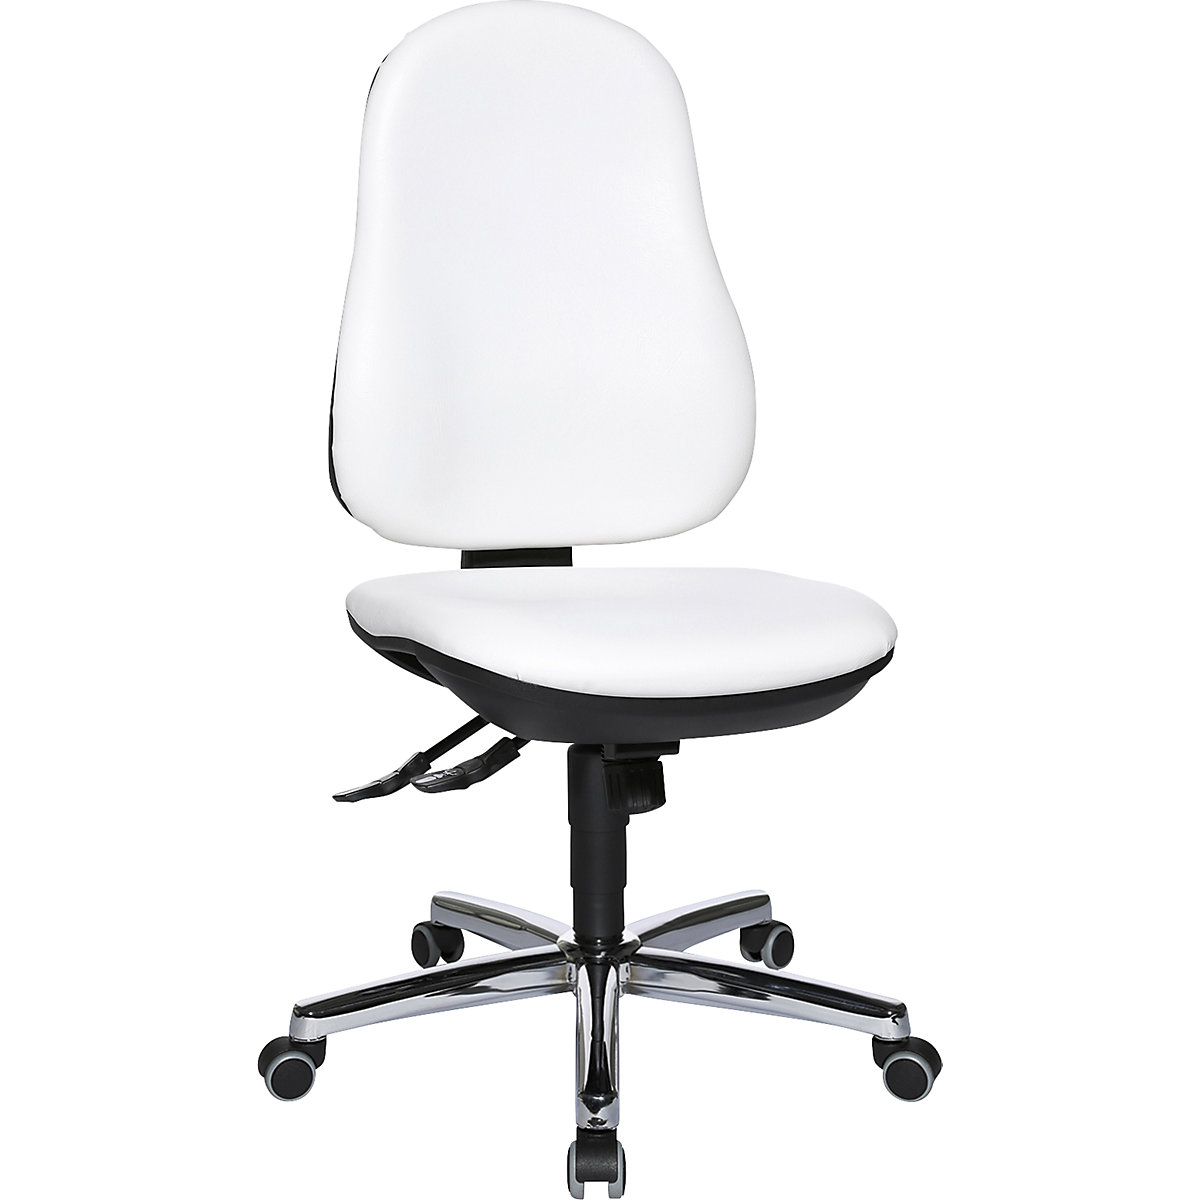 SUPPORT SY swivel chair – Topstar